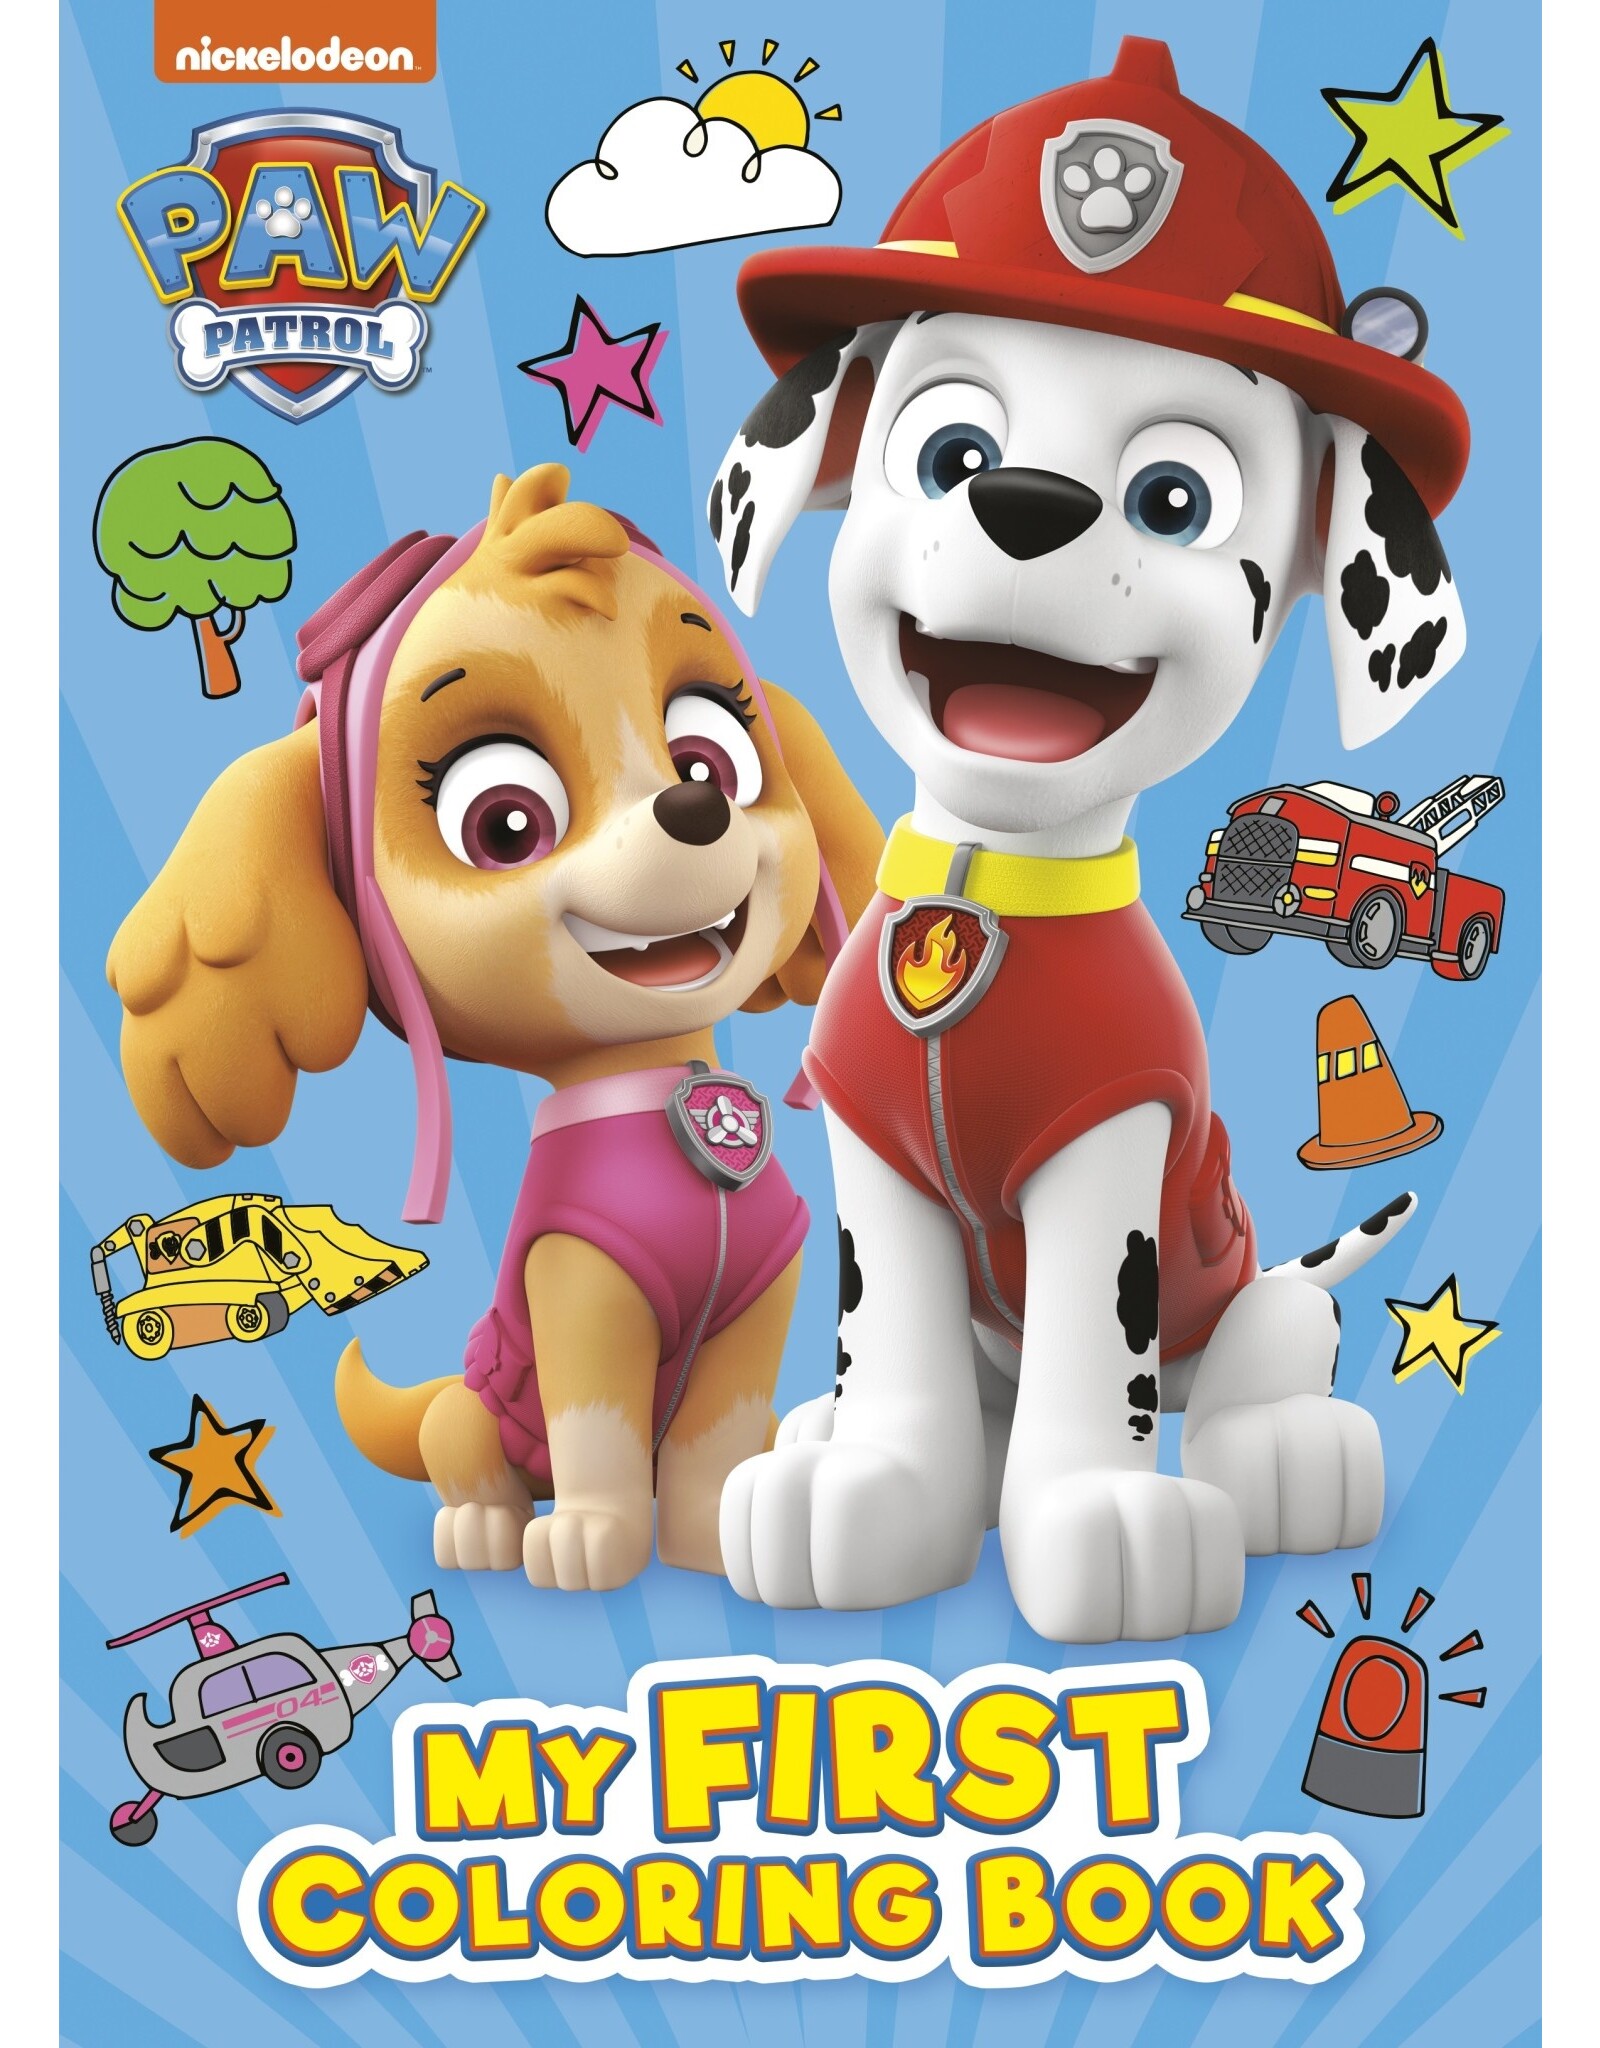 Paw Patrol: My First Coloring Book